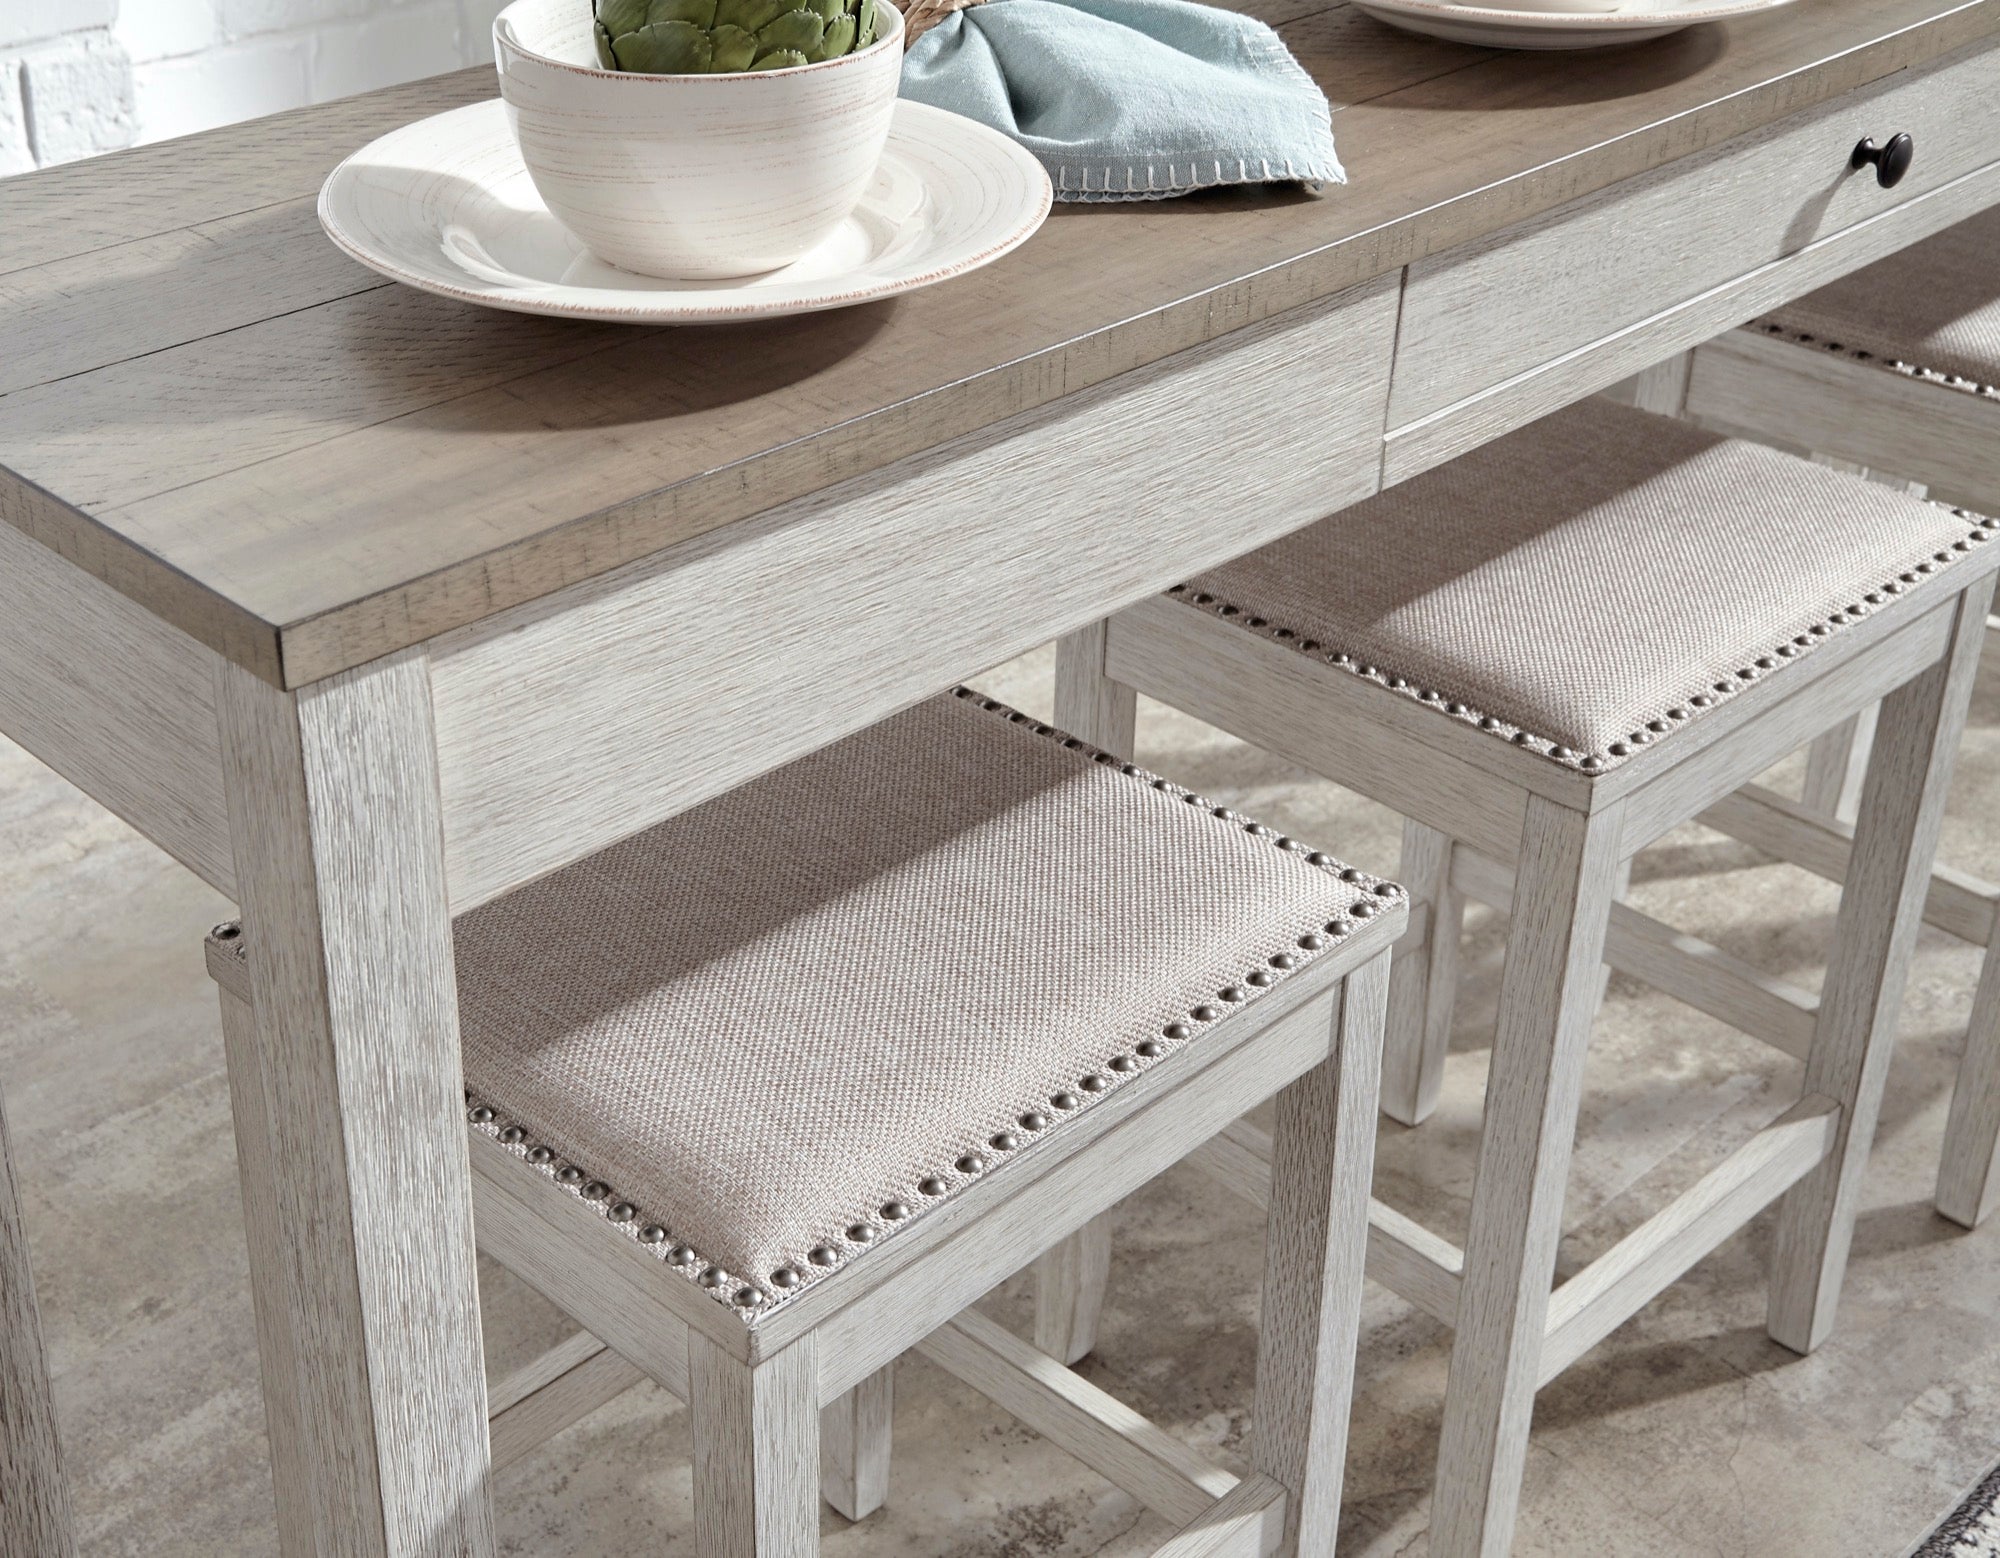 Skempton Counter Height Dining Table and Bar Stools